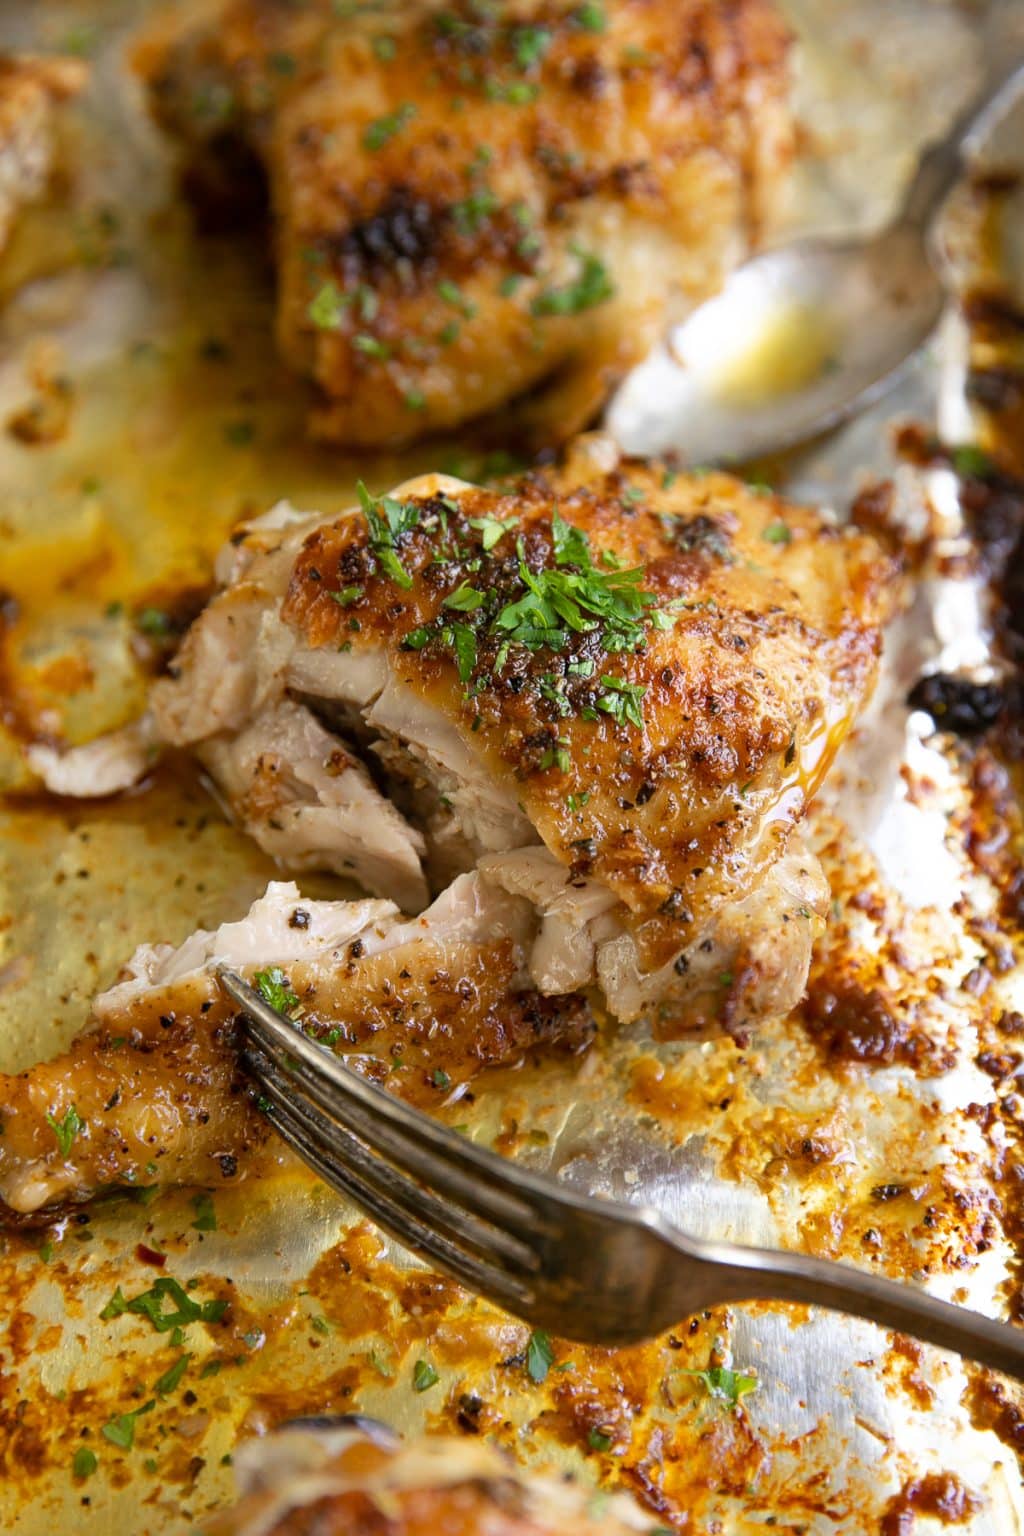 Baked Chicken Thighs (How to Bake Chicken Thighs) - The Forked Spoon